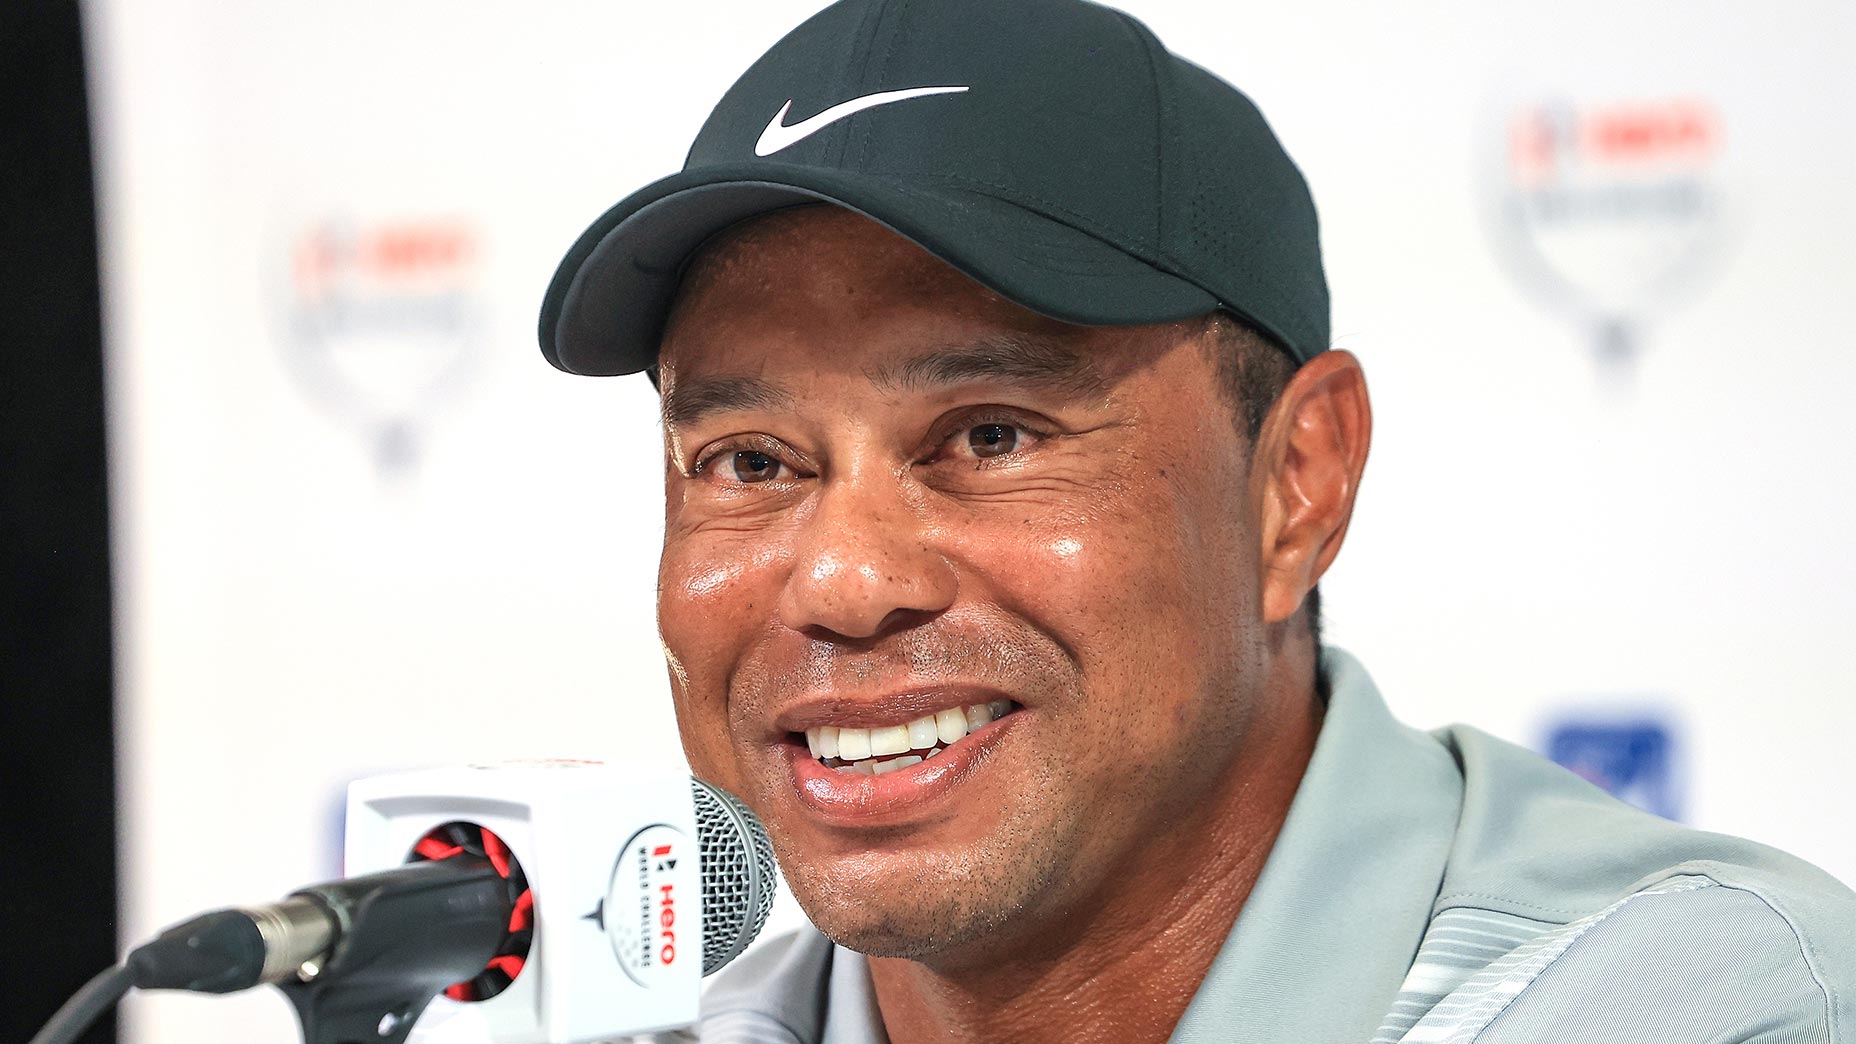 Tiger Woods smiles from the podium at the Hero World Challenge in front of the microphone